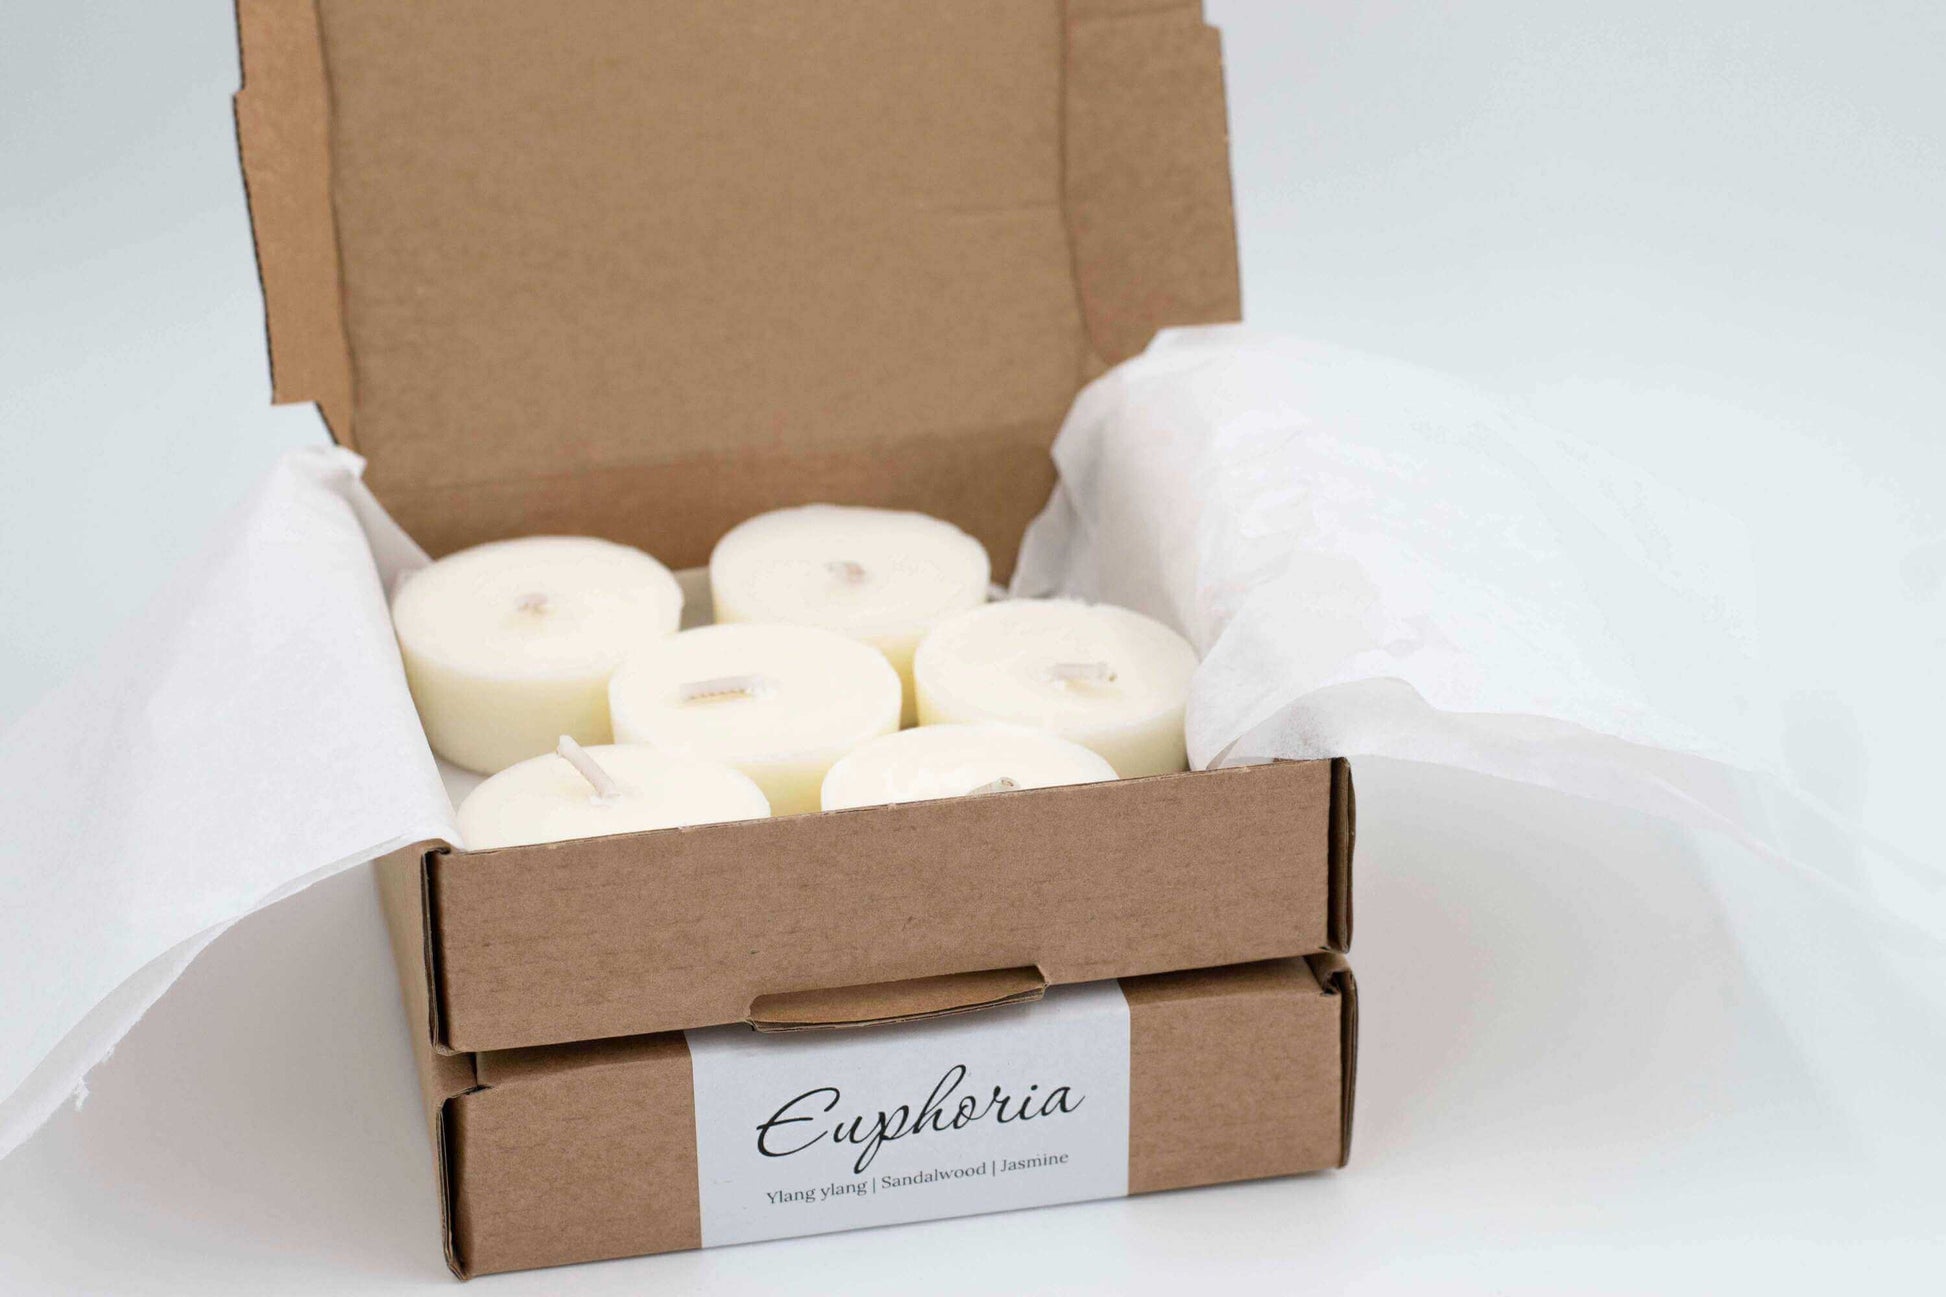 6-pack of Euphoria scented tea light candles made with ylang-ylang, jasmine, and sandalwood, eco-friendly and refillable in a cardboard box with tissue paper